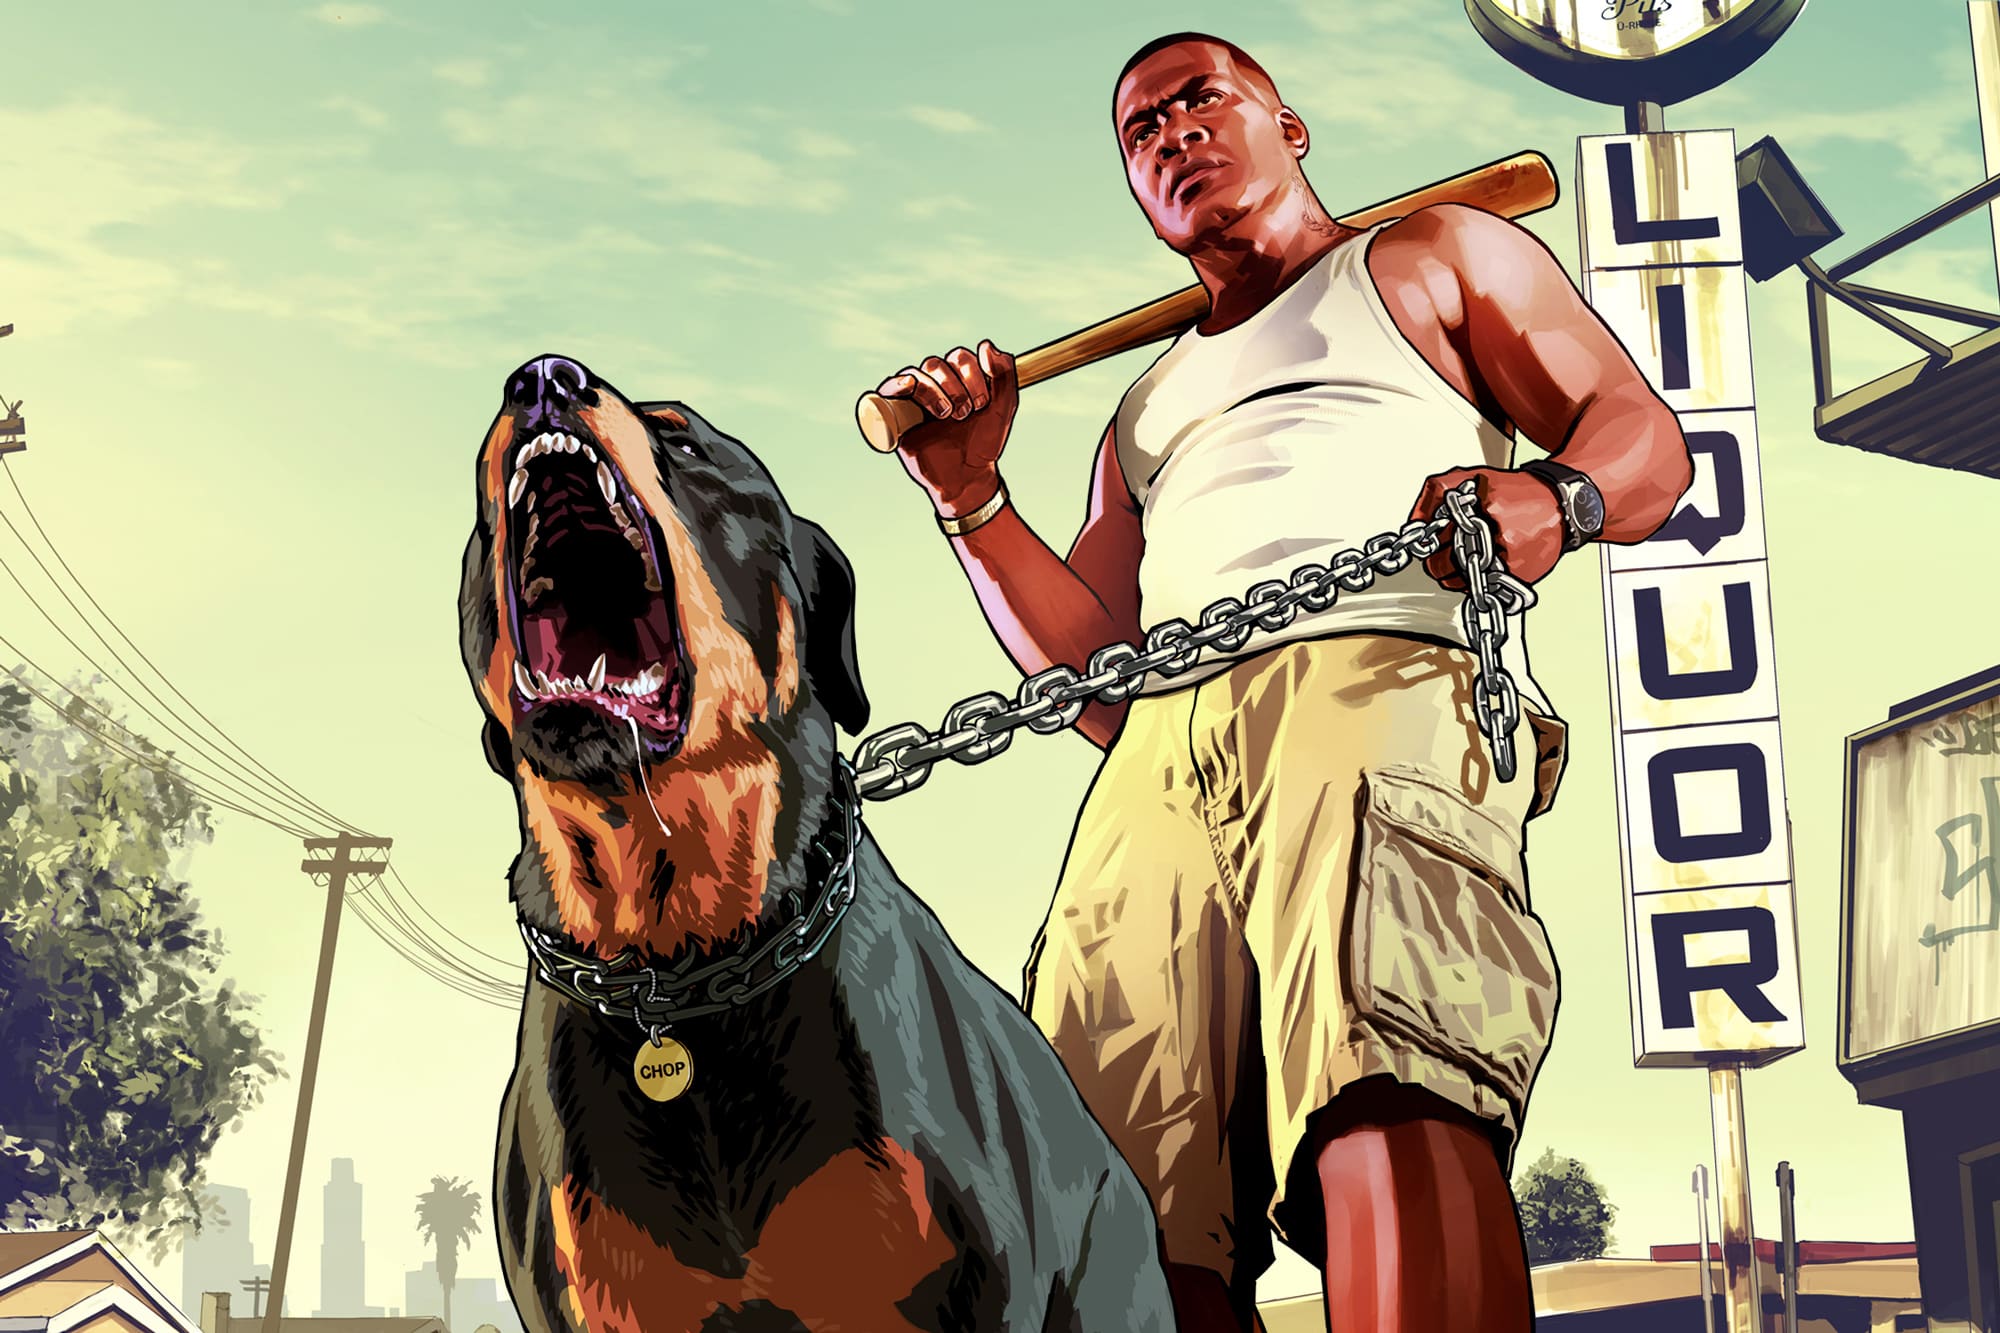 Stepping into the World of Grand Theft Auto V